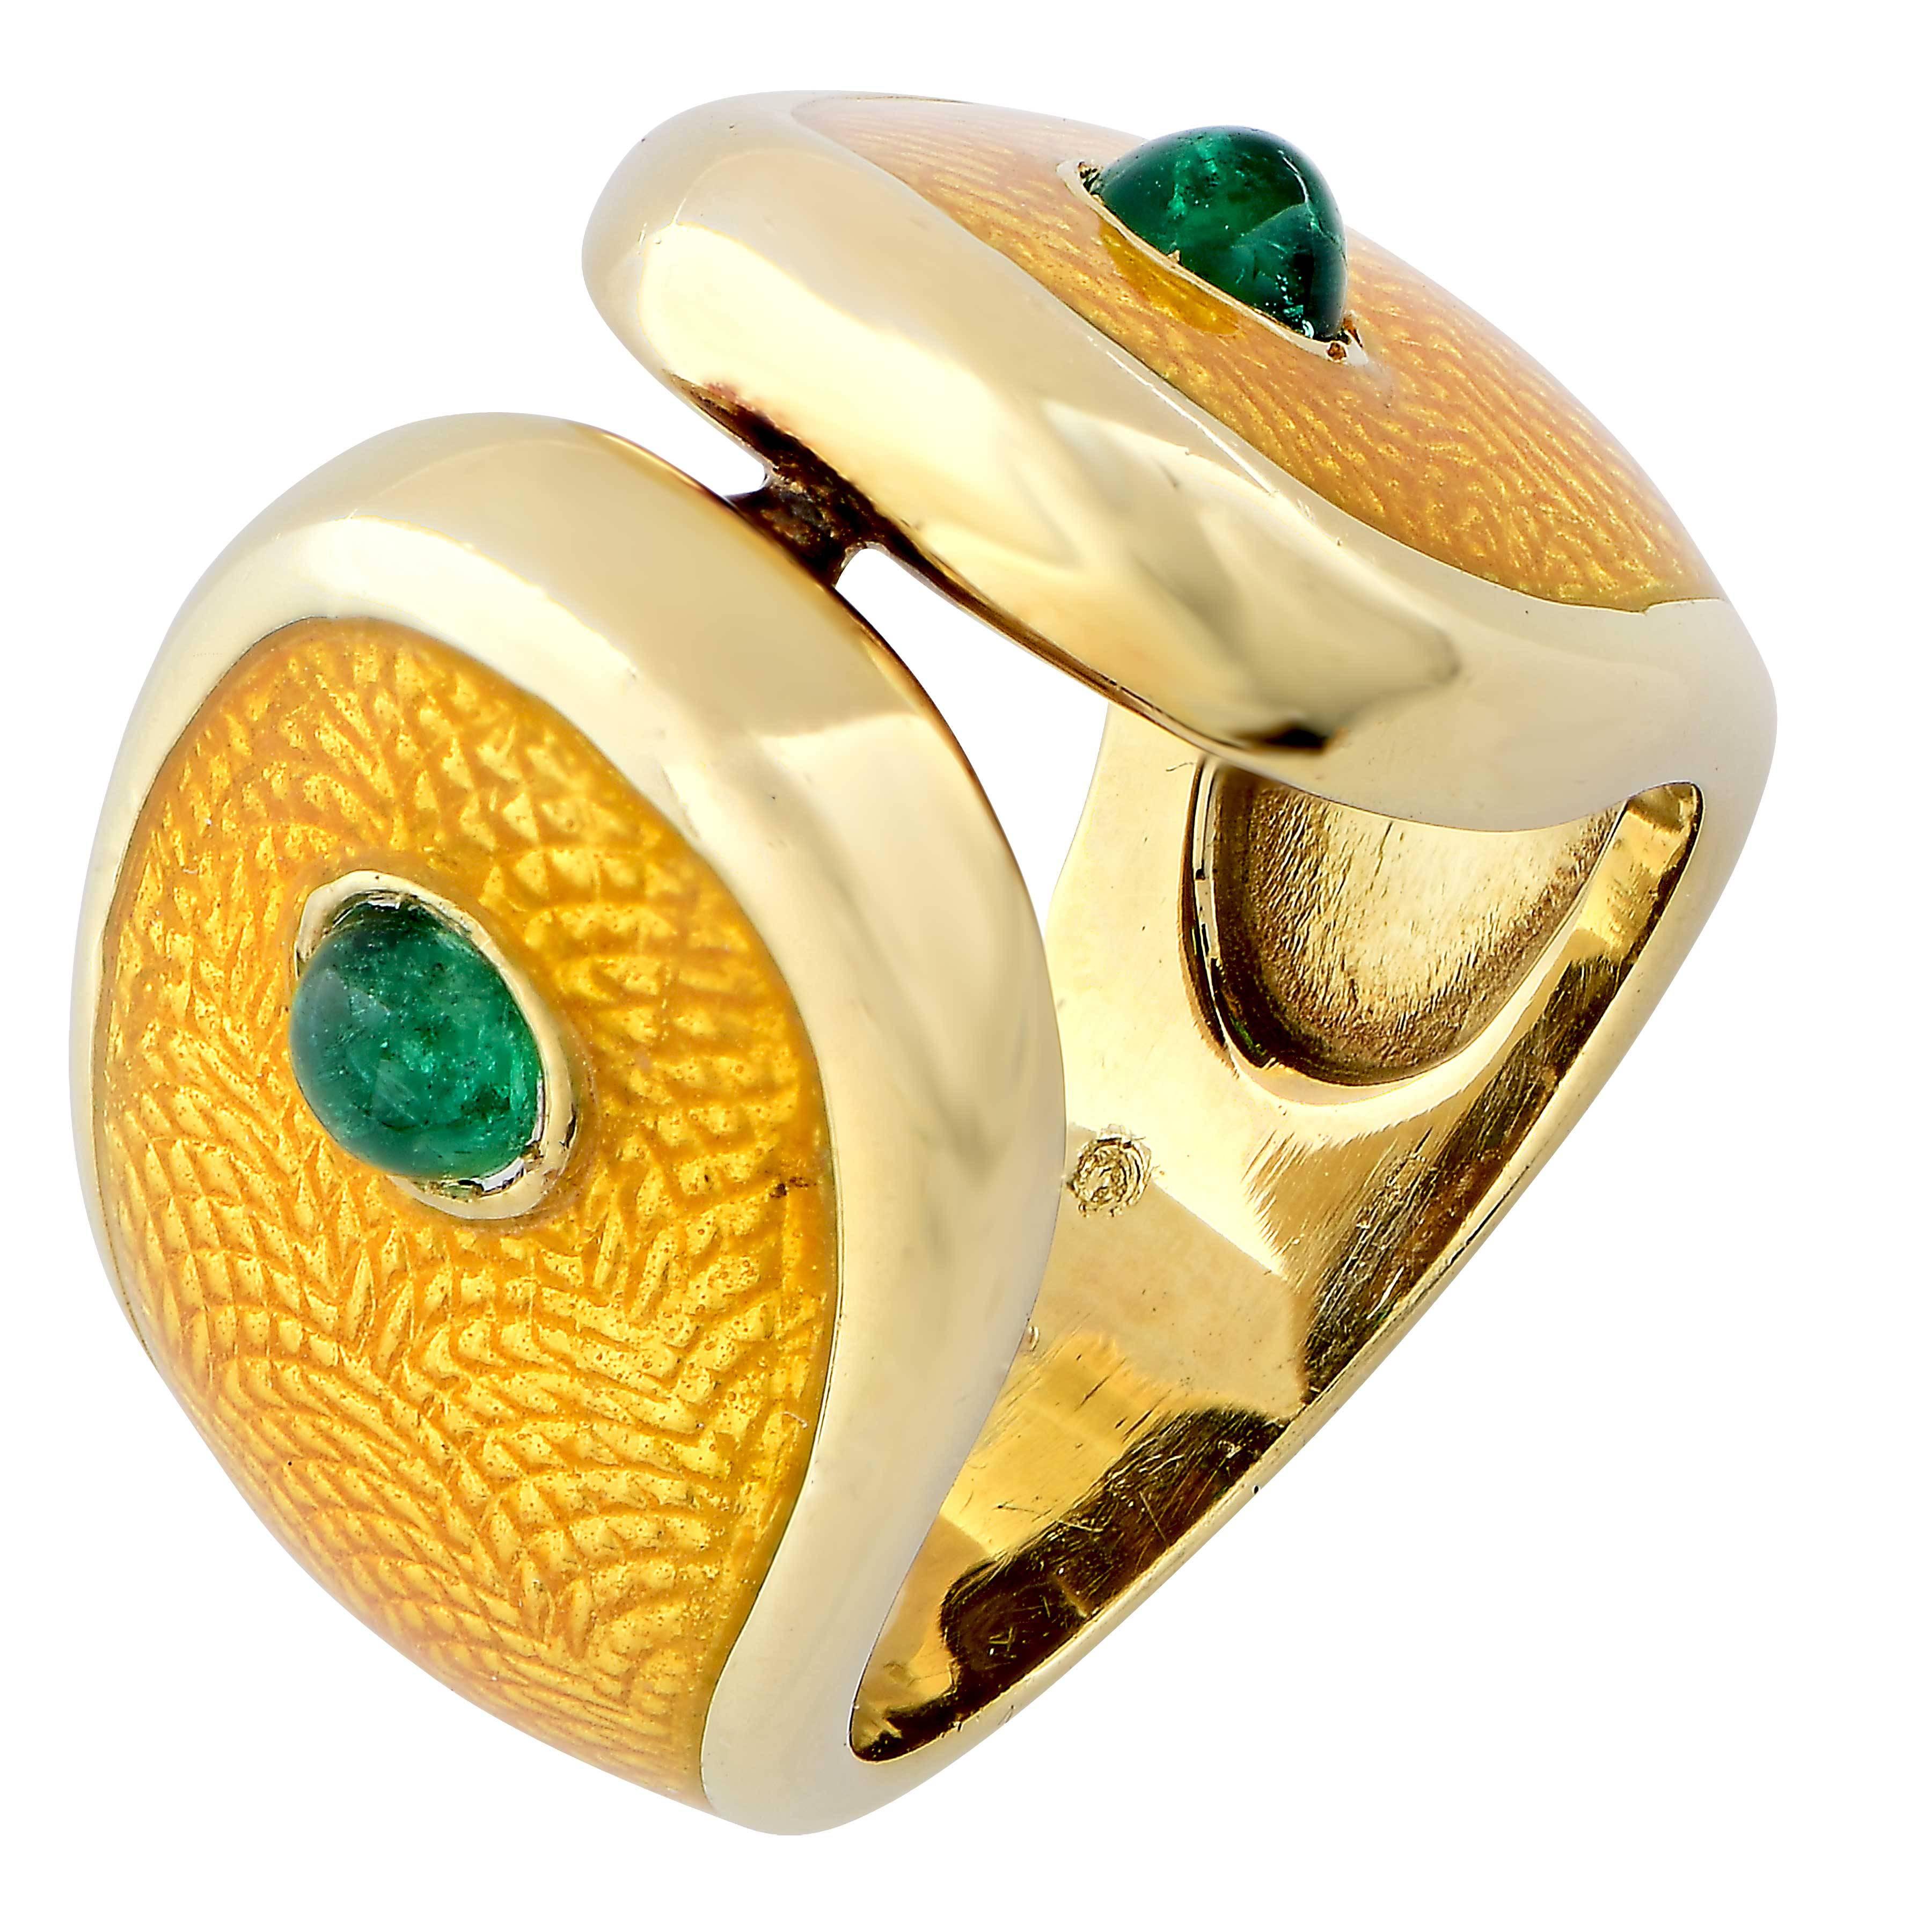 Carvin French Patterned Owl Emerald and Yellow Enamel 18 Karat Yellow Gold Ring In Excellent Condition For Sale In Bay Harbor Islands, FL